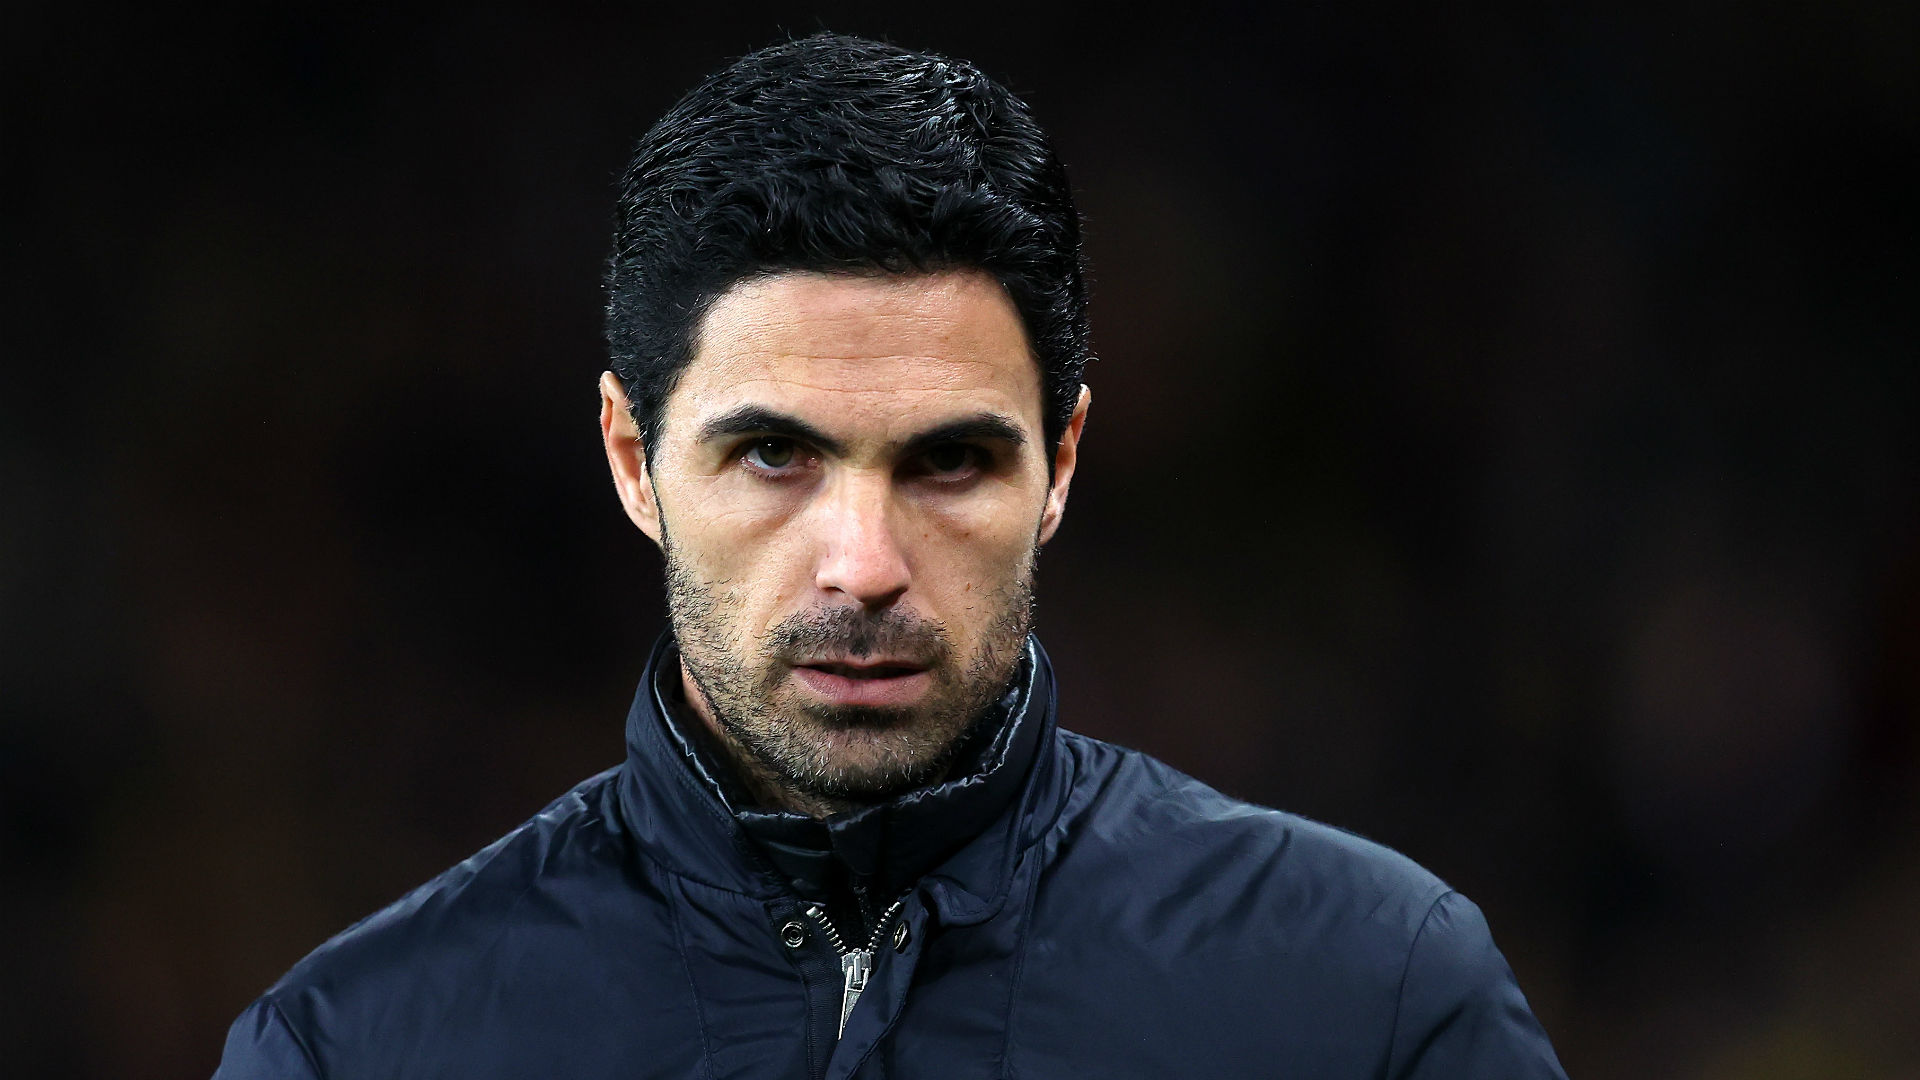 Mikel Arteta says time will be crucial for Arsenal in their bid to emulate the success of Premier League champions Liverpool.